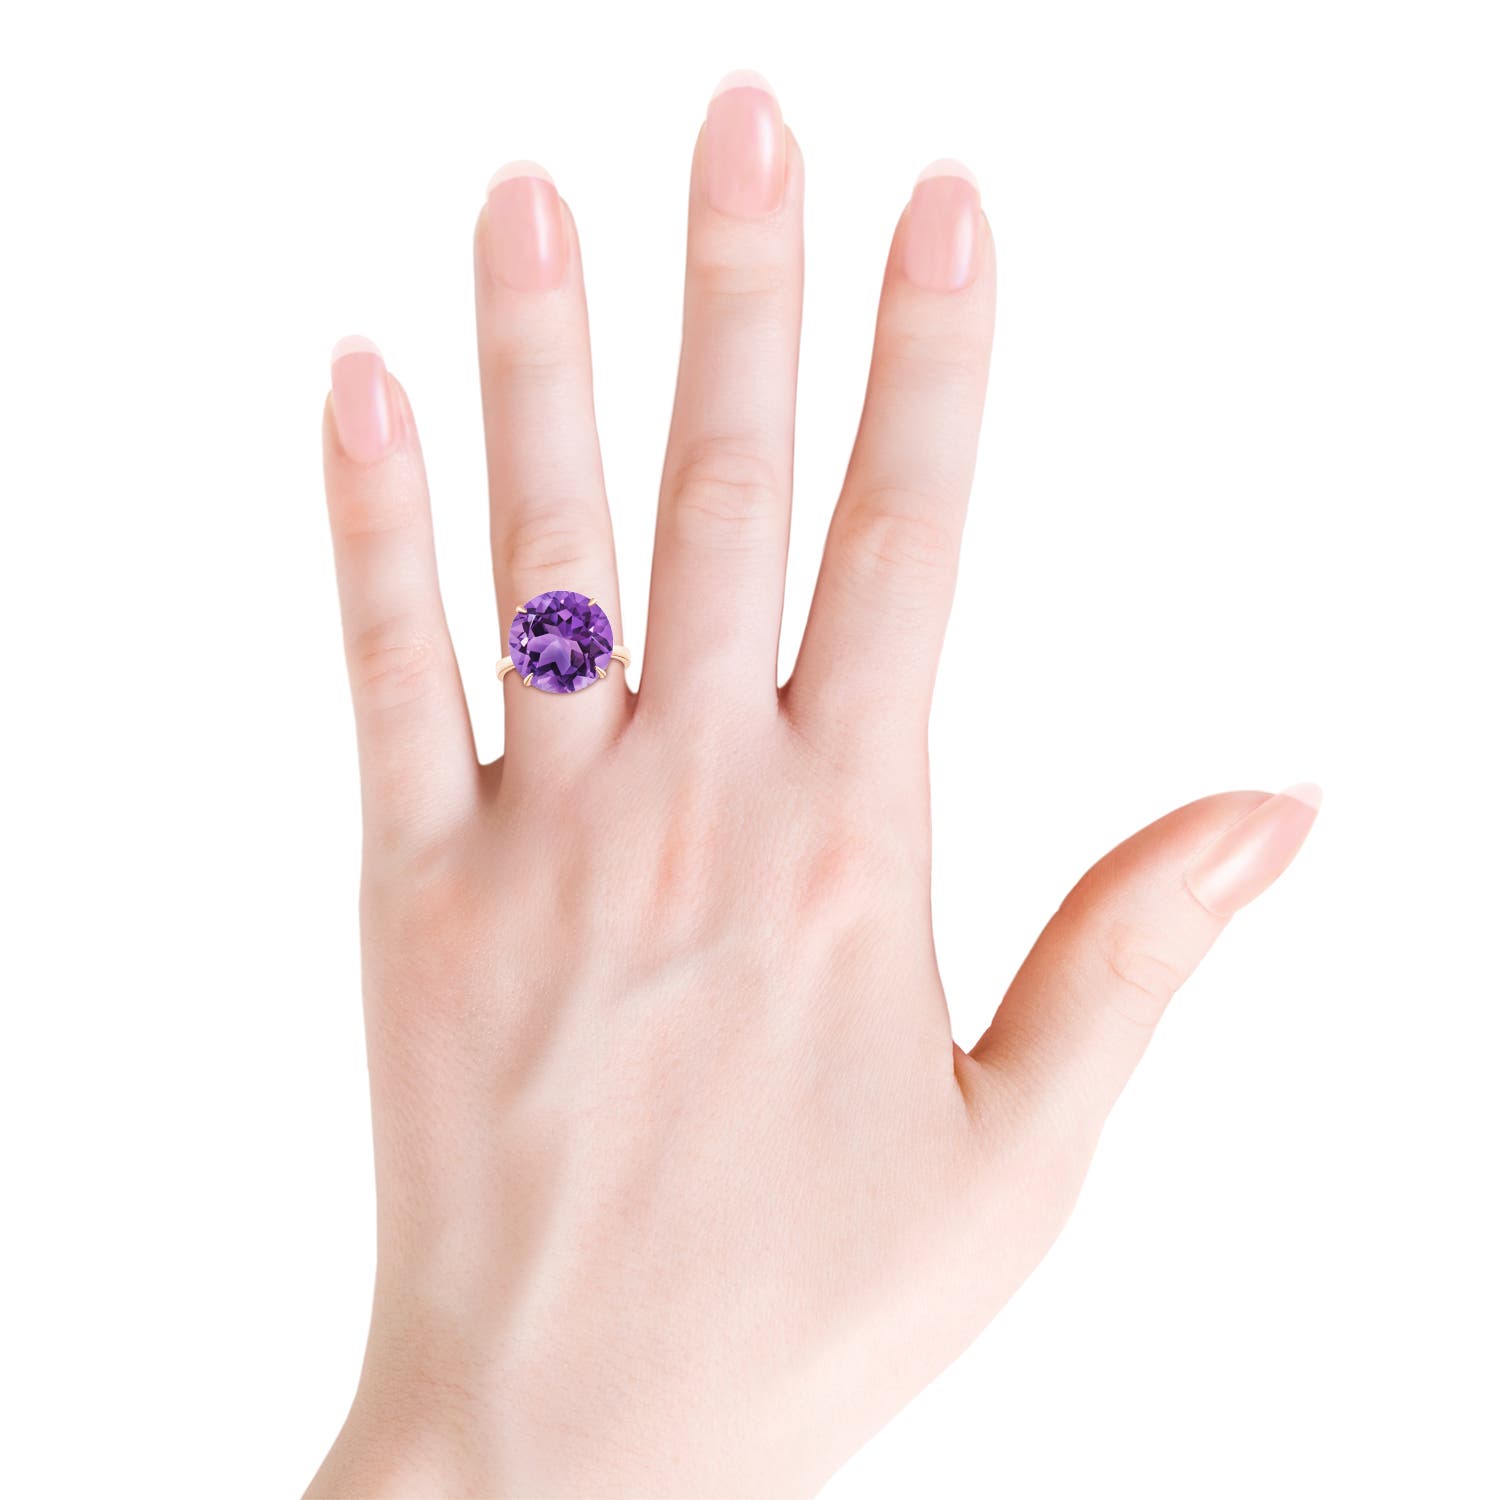 AA- Amethyst / 8.5 CT / 14 KT Rose Gold